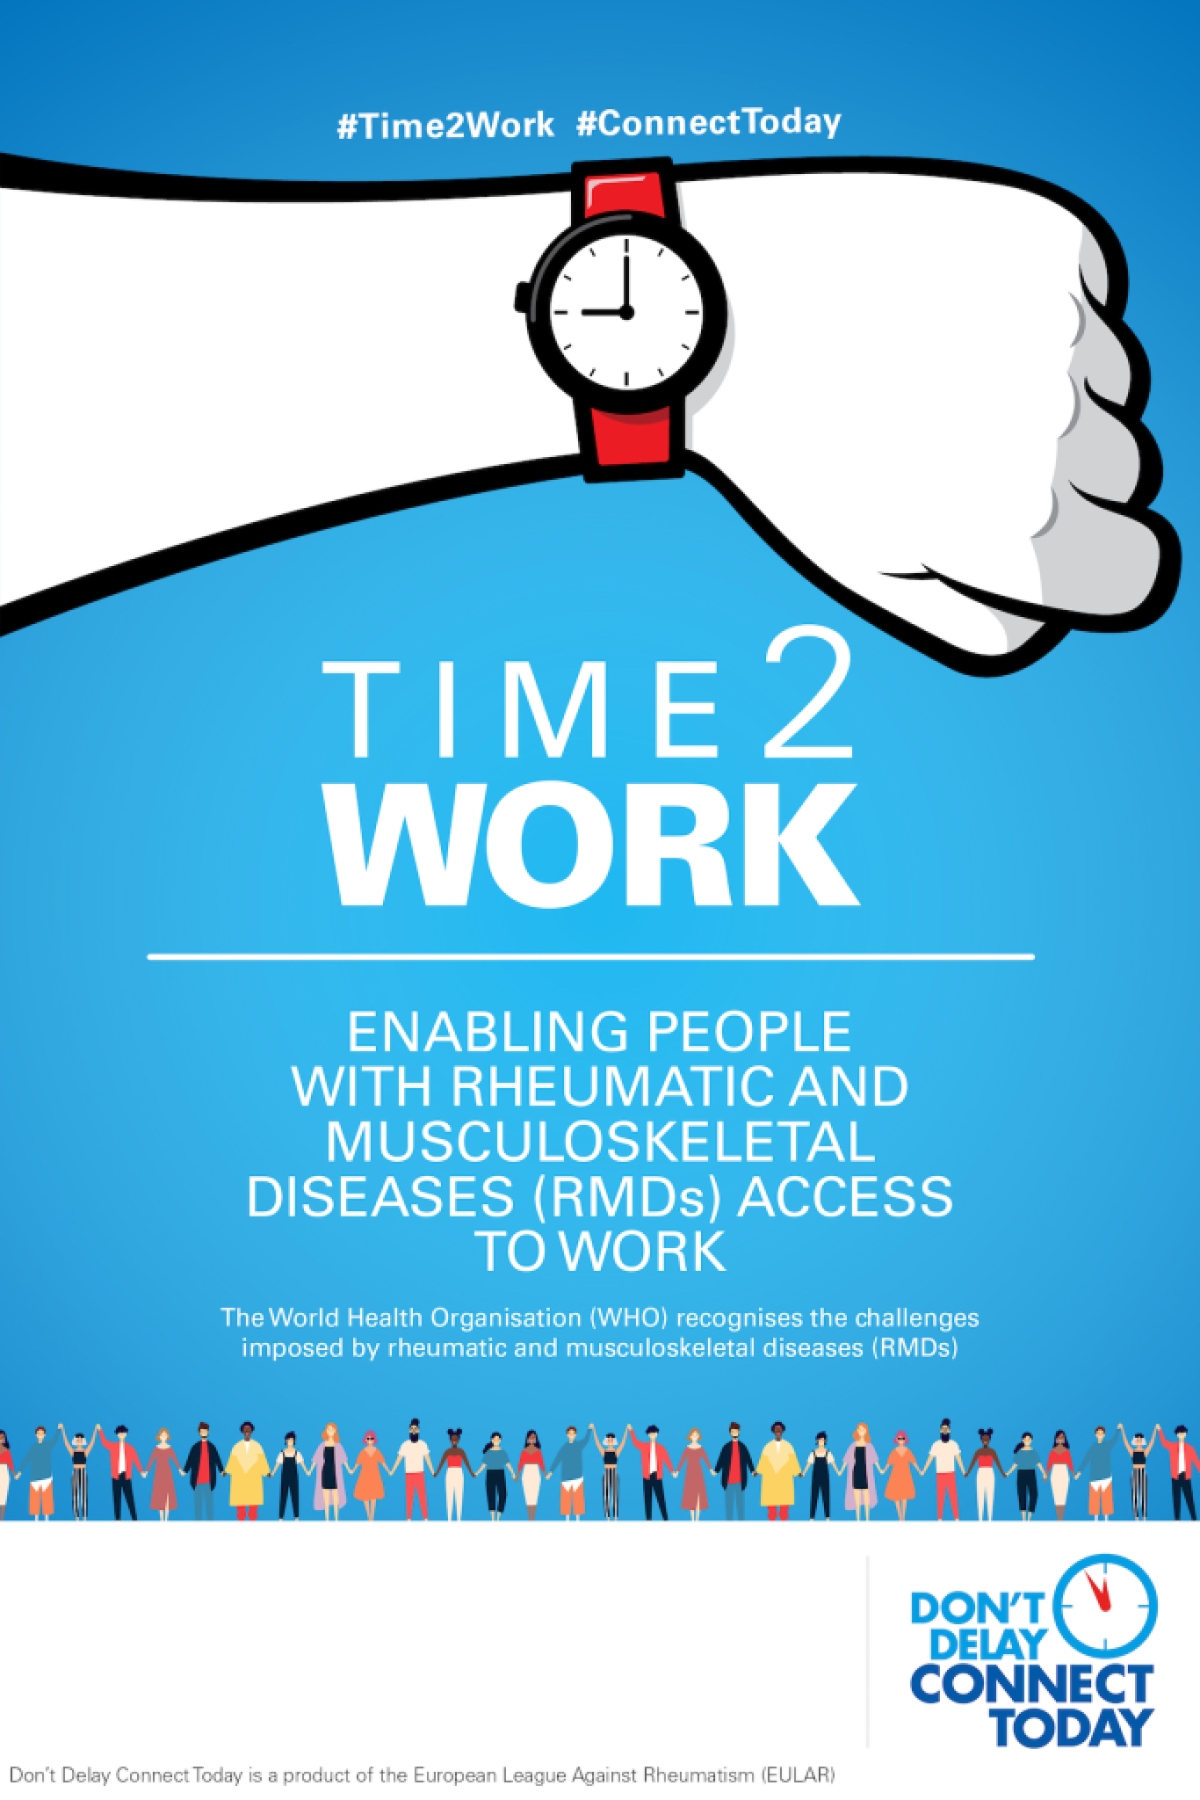 The official poster from the European League Against Rheumatism, showing a wristwatch on the left hand, titled 'Time2Work' - enabling people with rheumatic and musculoskeletal diseases (RMDs) access to work. The poster states that the World Health Organisation (WHO) recognises the challenges imposed by rheumatic and musculoskeletal diseases (RMDs). The campaign hashtags shown include #Time2Work and #ConnectToday. 